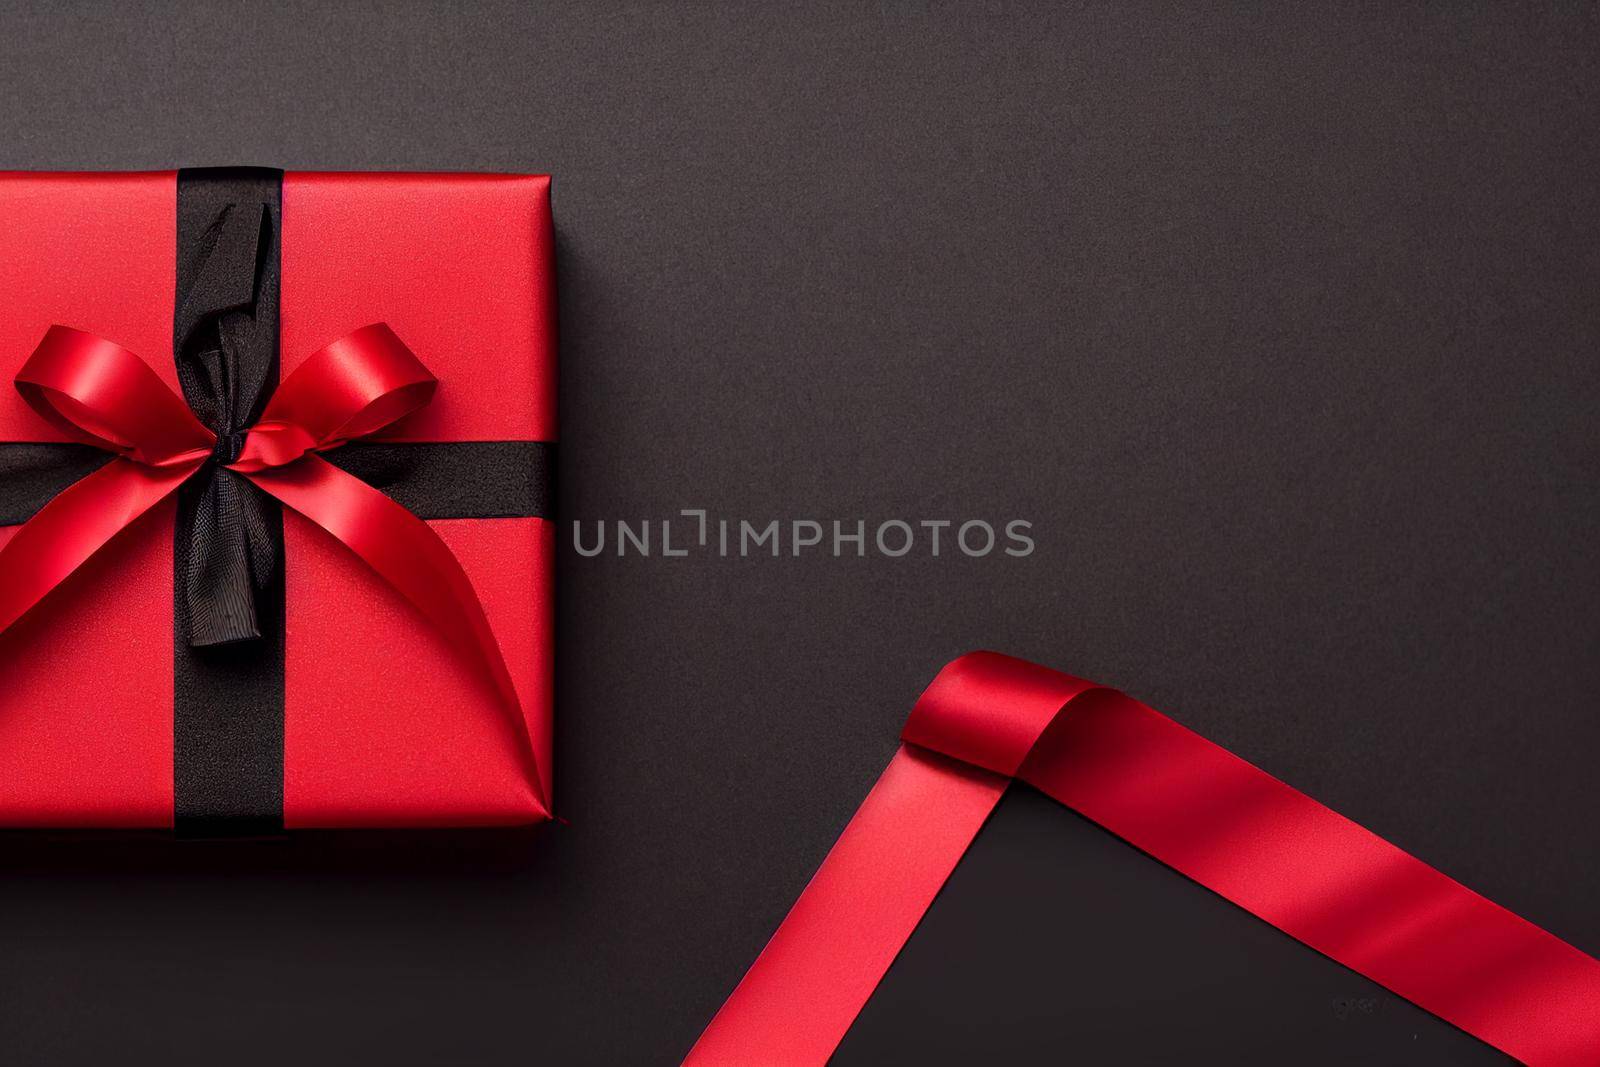 3D Render of red color gift box with black ribbon isolated against black background and Christmas decorations, top view design by FokasuArt